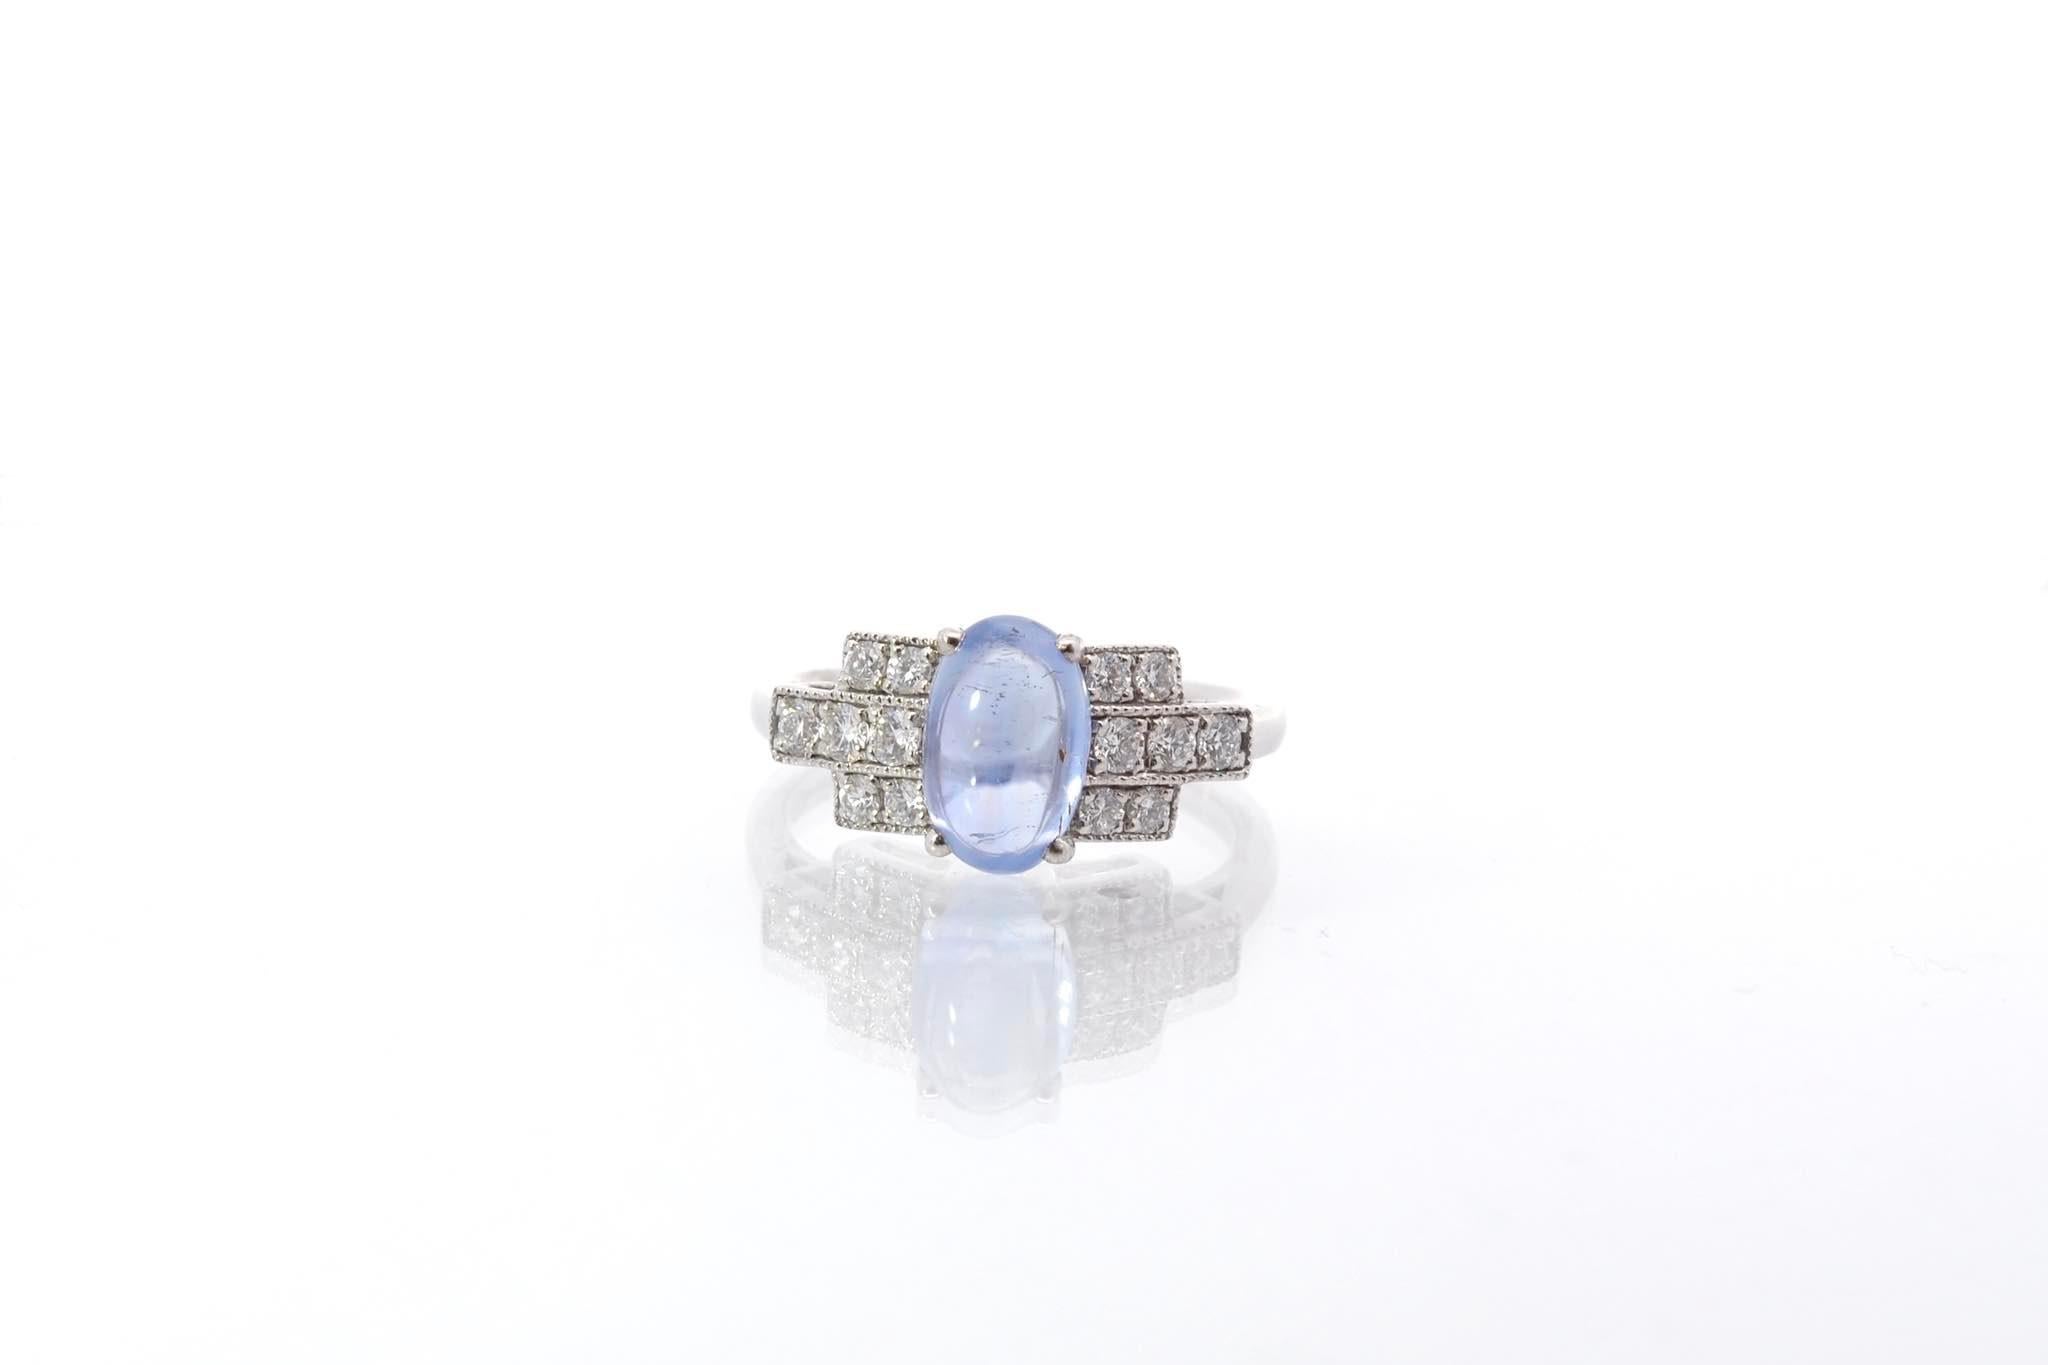 Stones: Cabochon sapphire: 2.56 cts and 14 diamonds: 0.38 ct
Material: 18k white gold
Weight: 4.3g
Period: Recent vintage style
Size: 52 (free sizing)
Certificate
Ref. : 25565